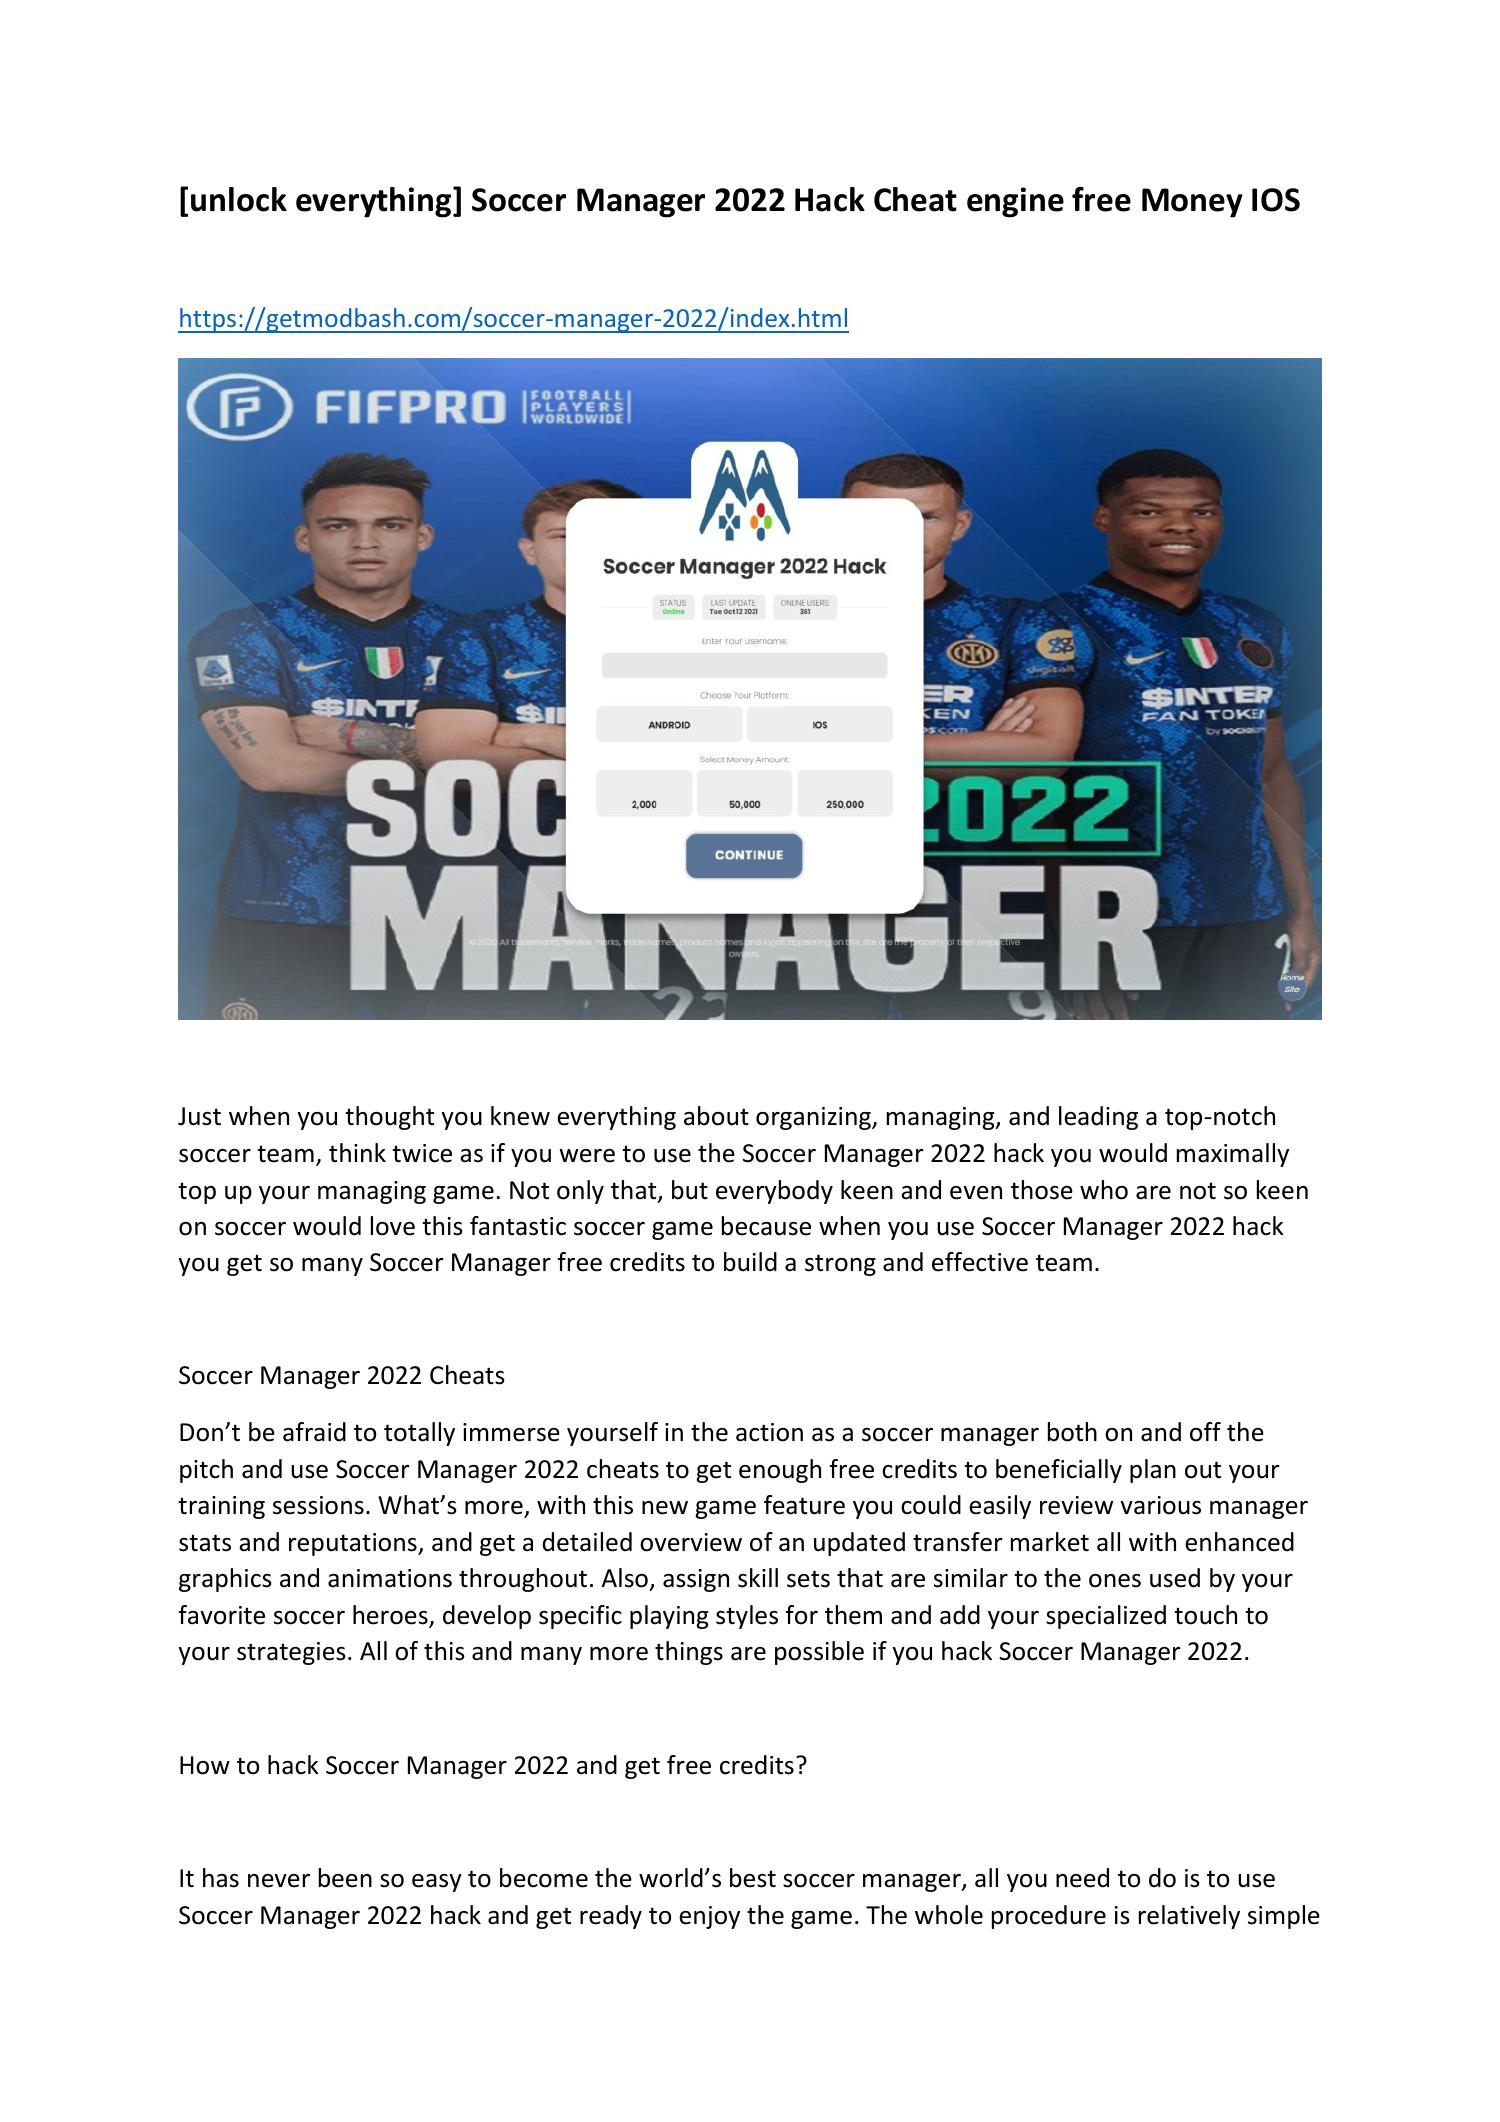 Football Manager 2022  Steam 22.4.0 - Page 10 - FearLess Cheat Engine